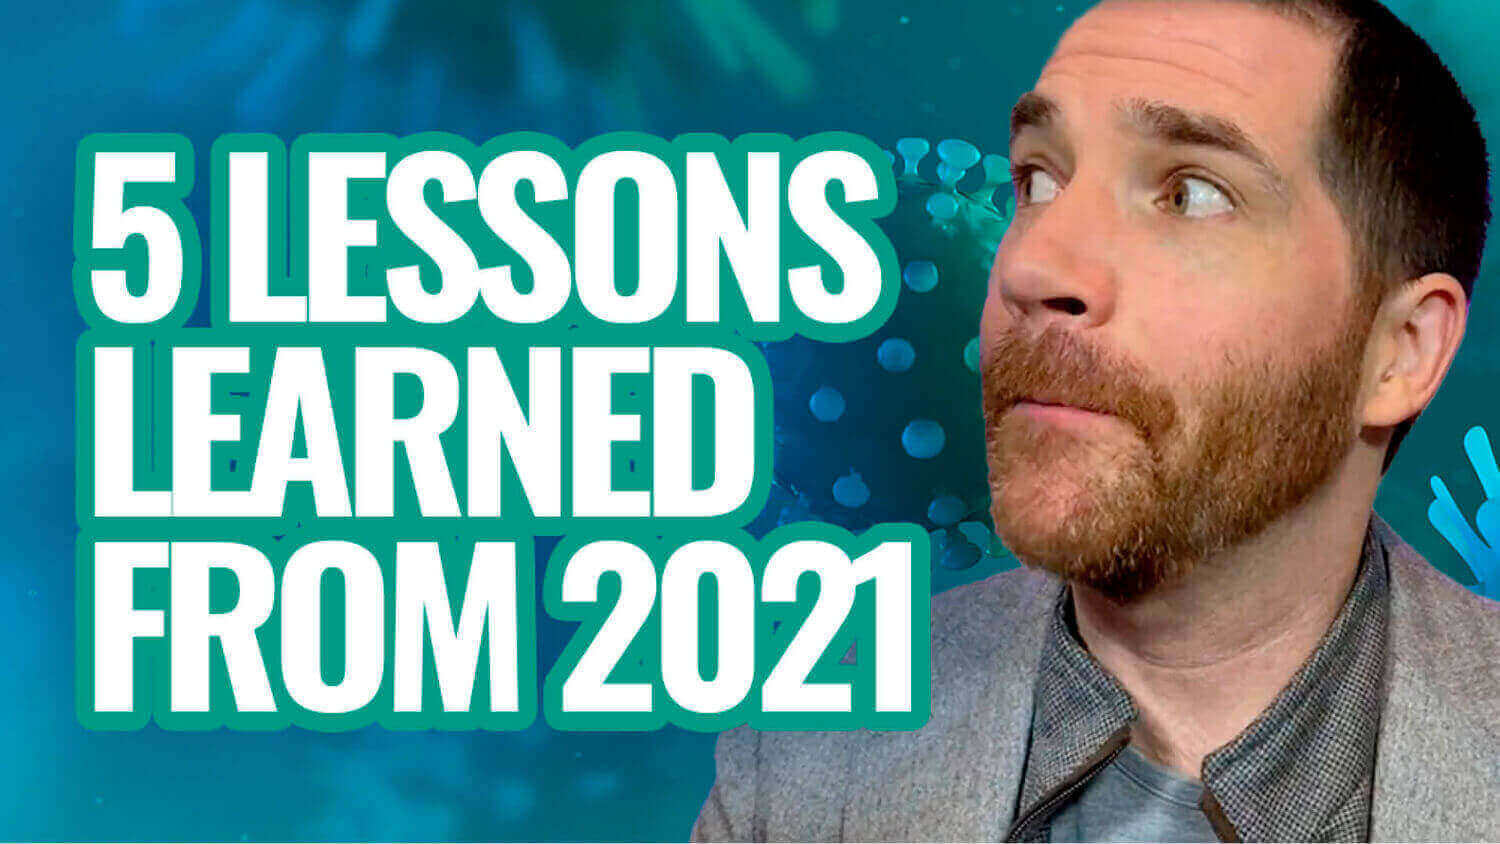 5 real and hard lessons we learnt from 2021